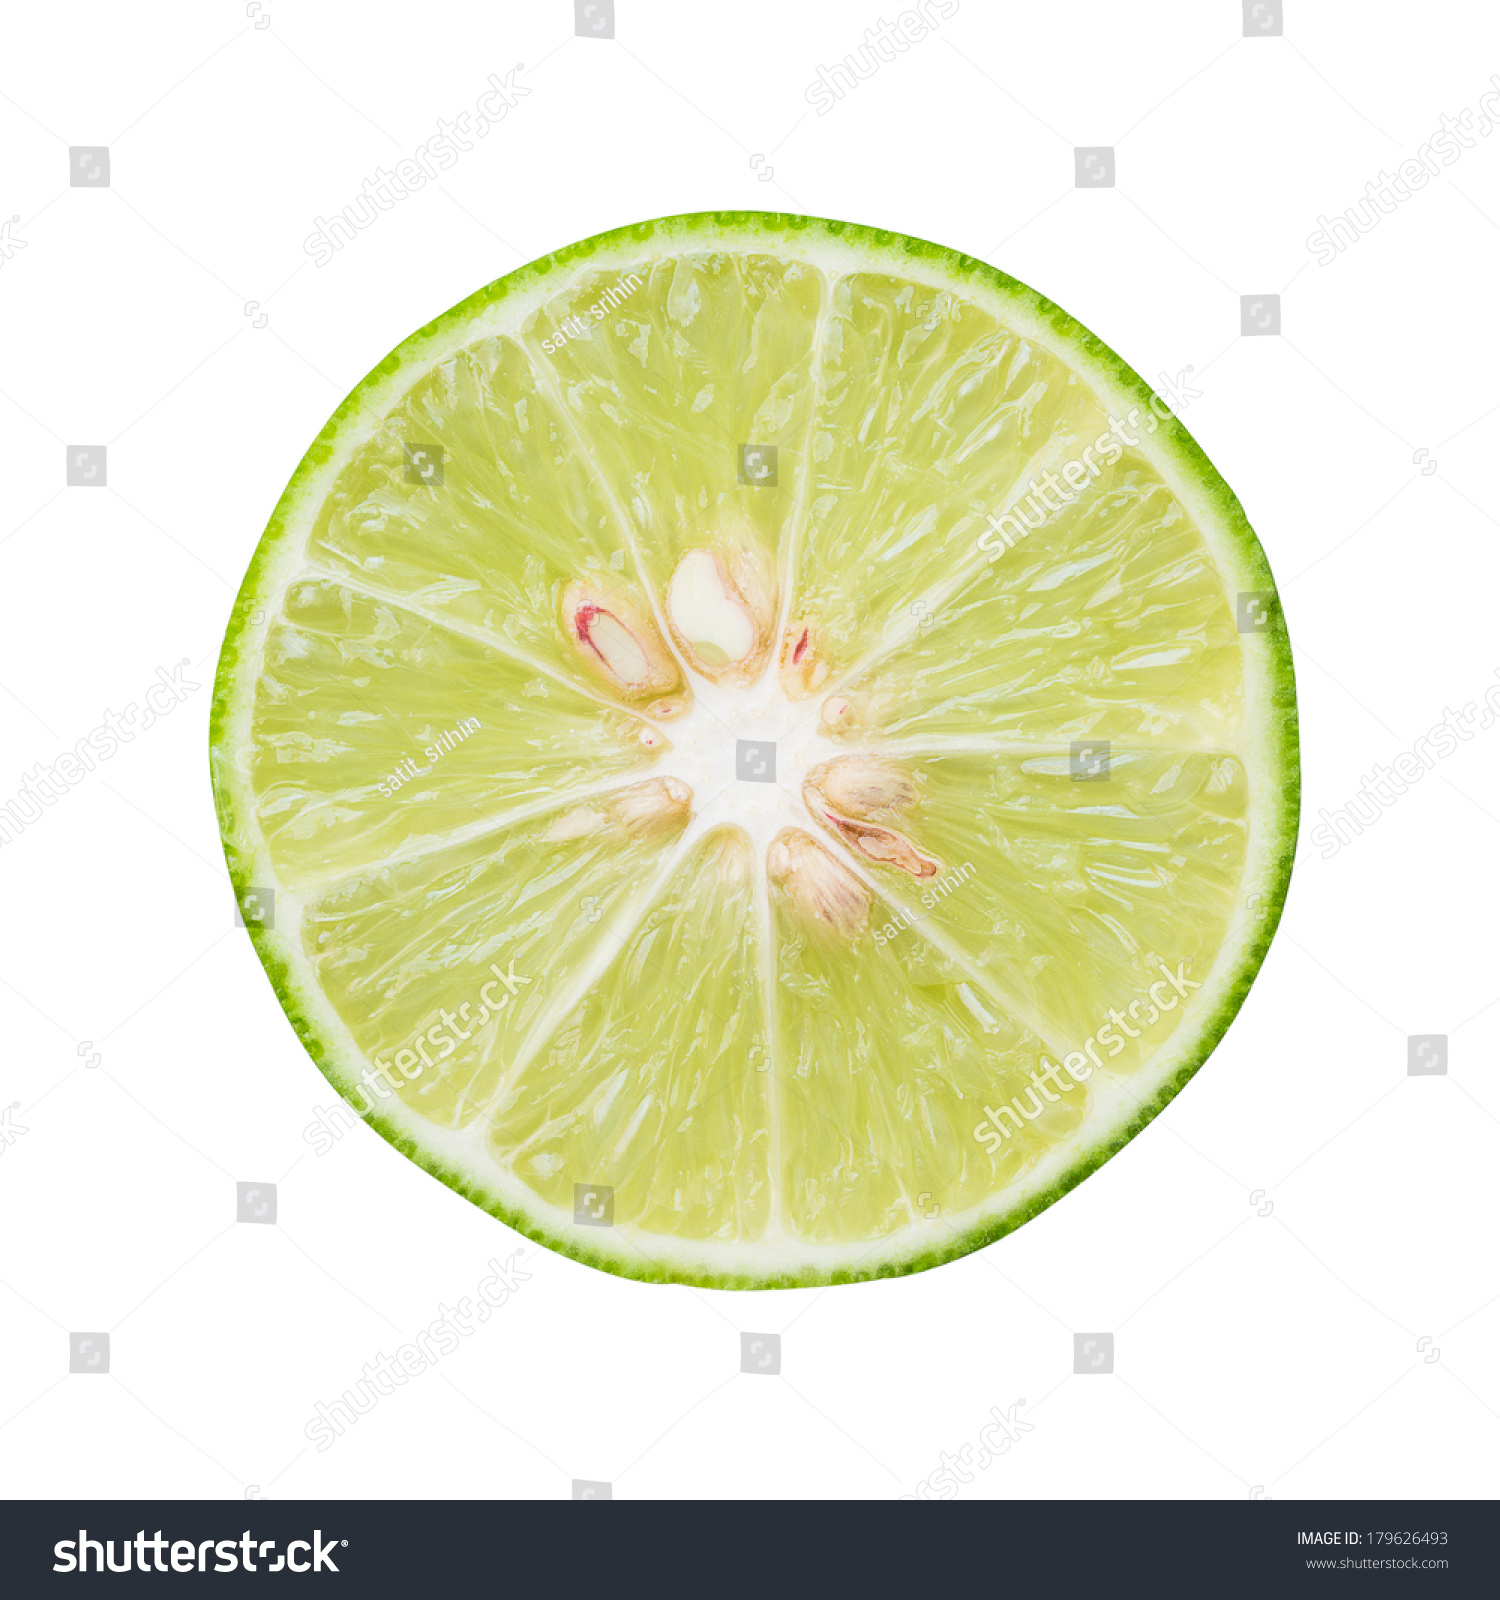 half citrus lime fruit isolated on white background with clipping path,top view #179626493